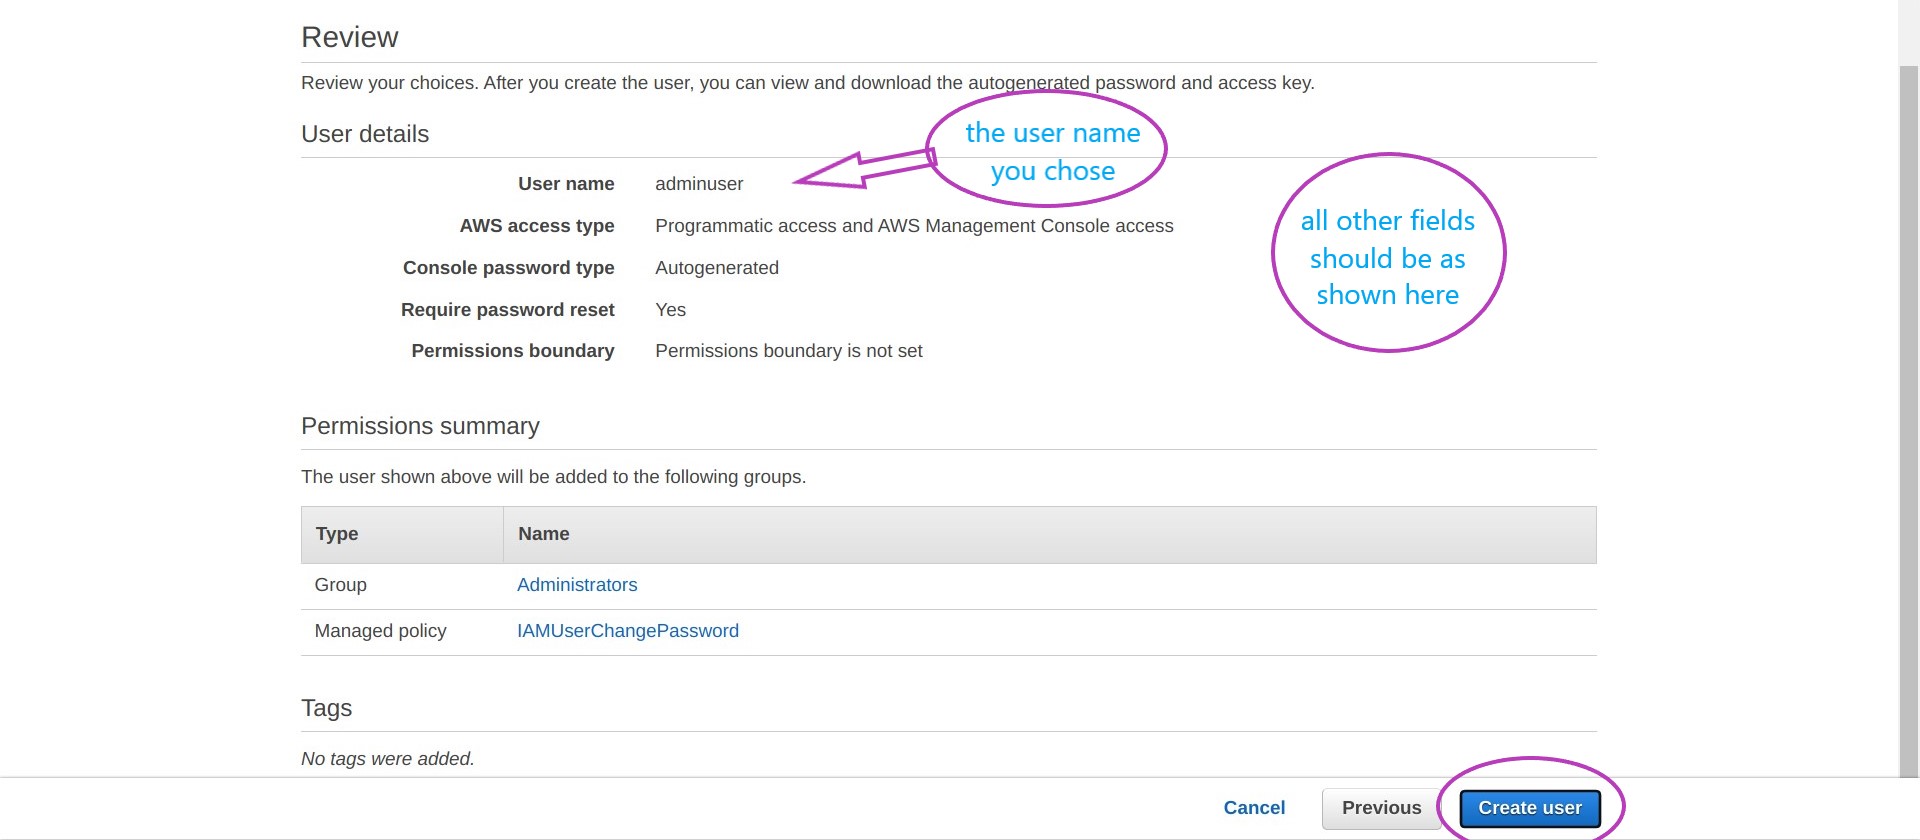 Screen shot of AWS Console IAM Add user Review page in a browser with the button "Create user" circled